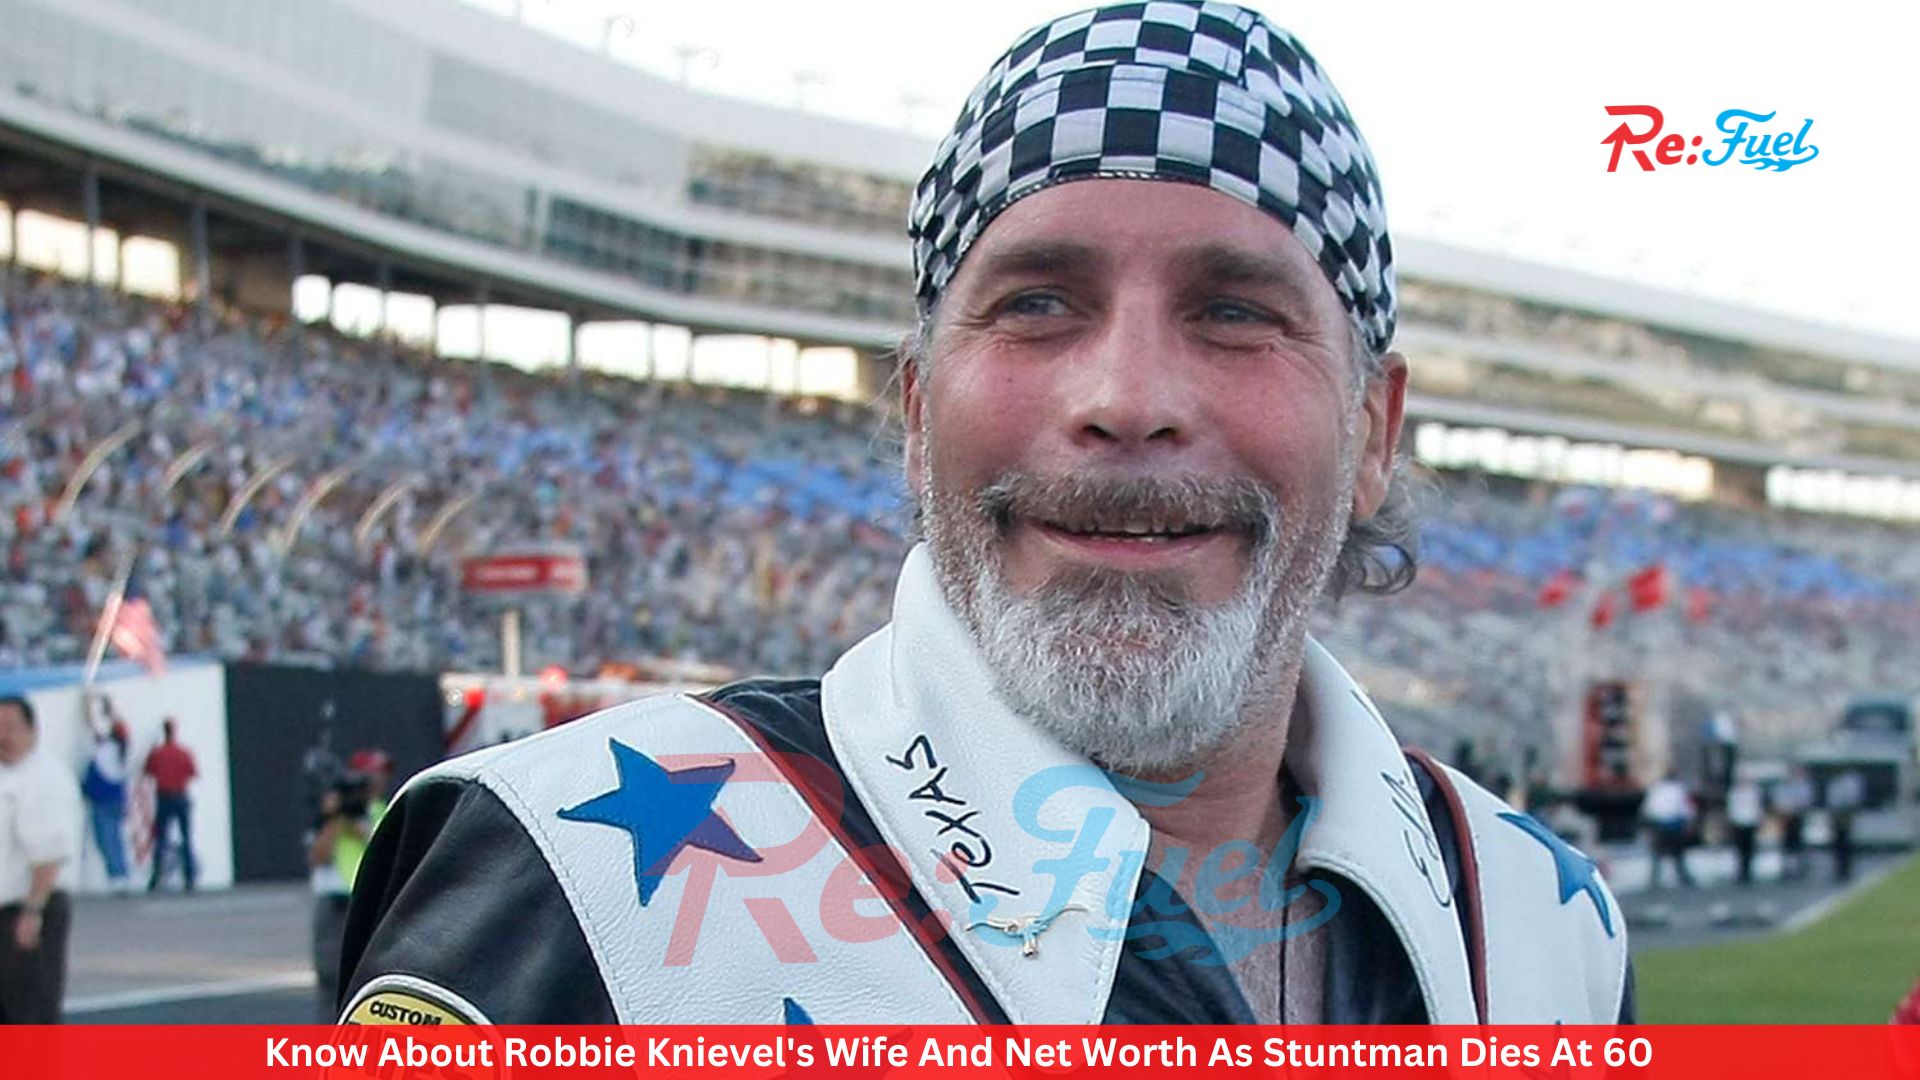 Know About Robbie Knievel's Wife And Net Worth As Stuntman Dies At 60